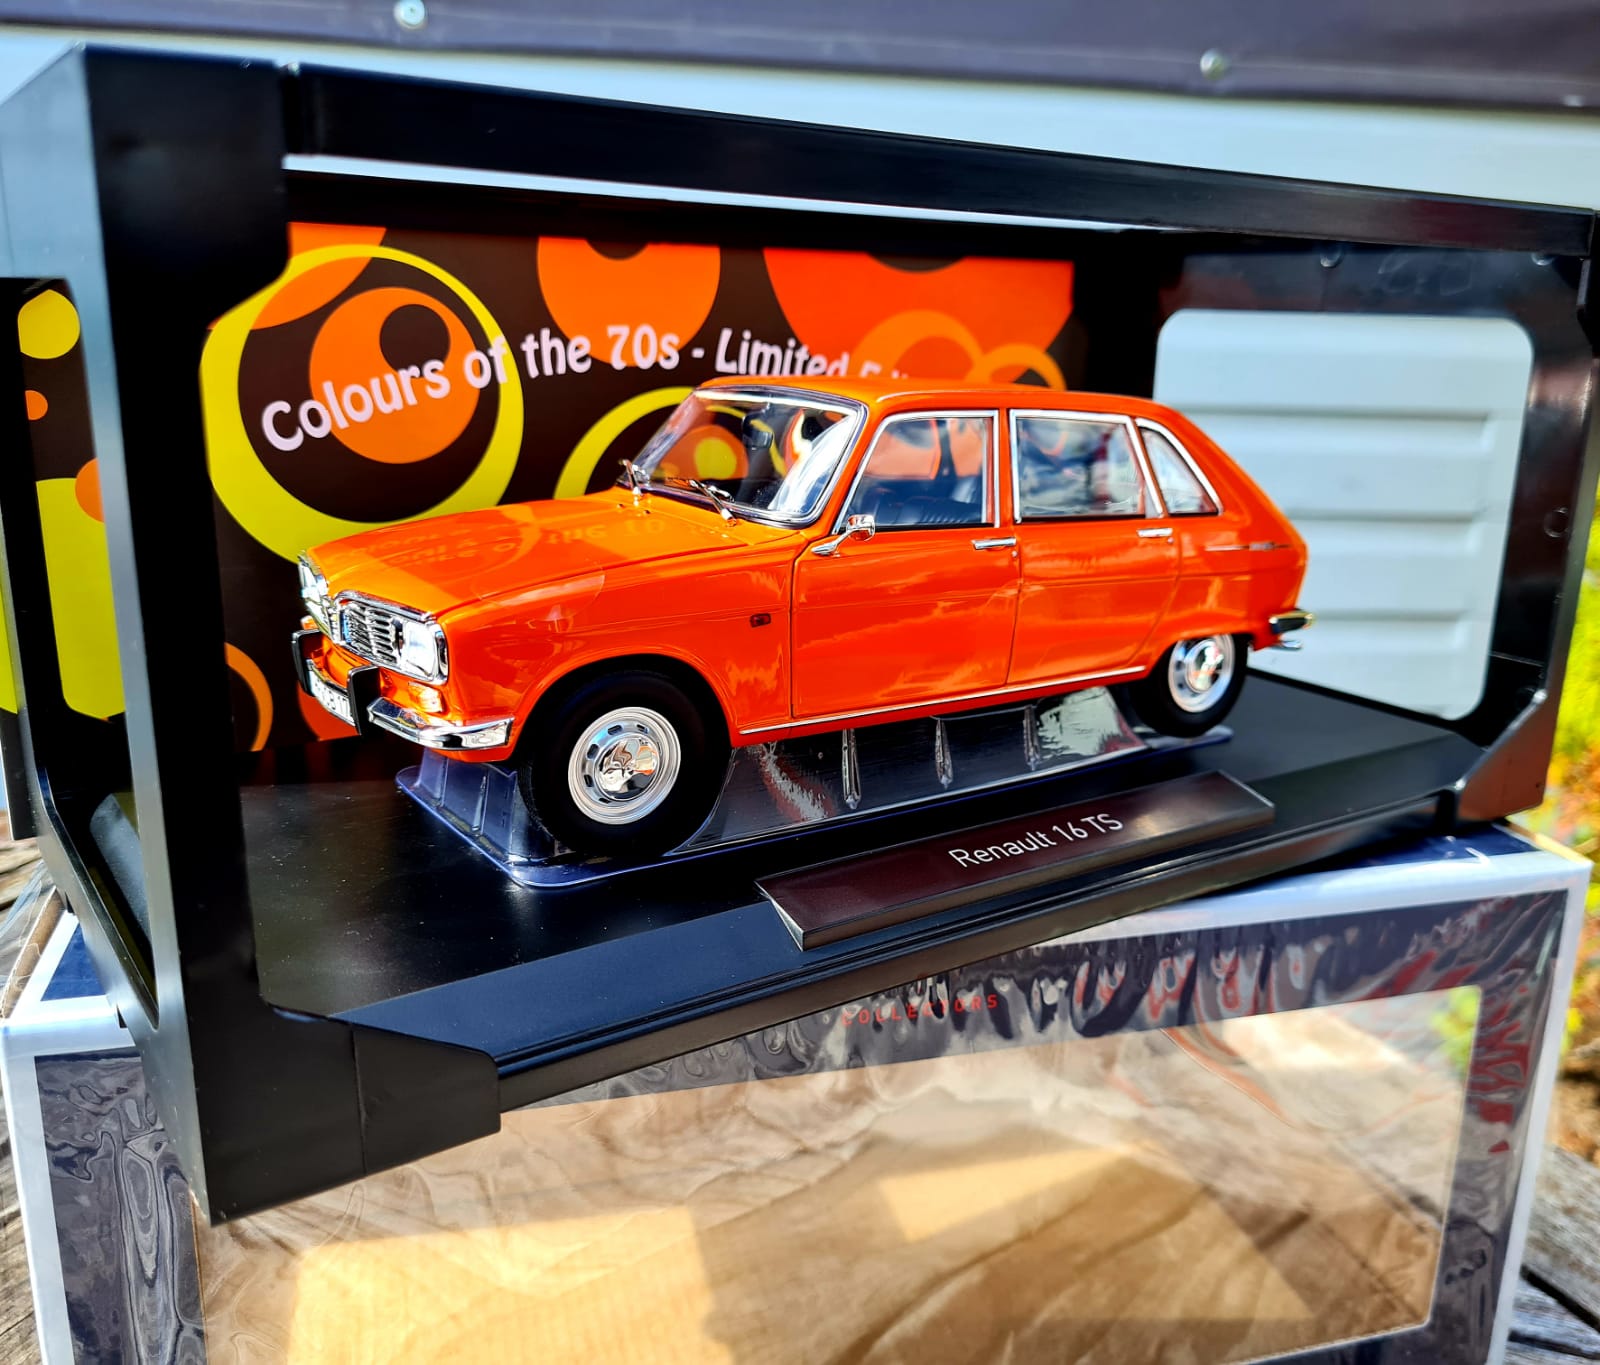 Renault 16 2. Series 1971 orange 1:18 Norev Colours of the 70s